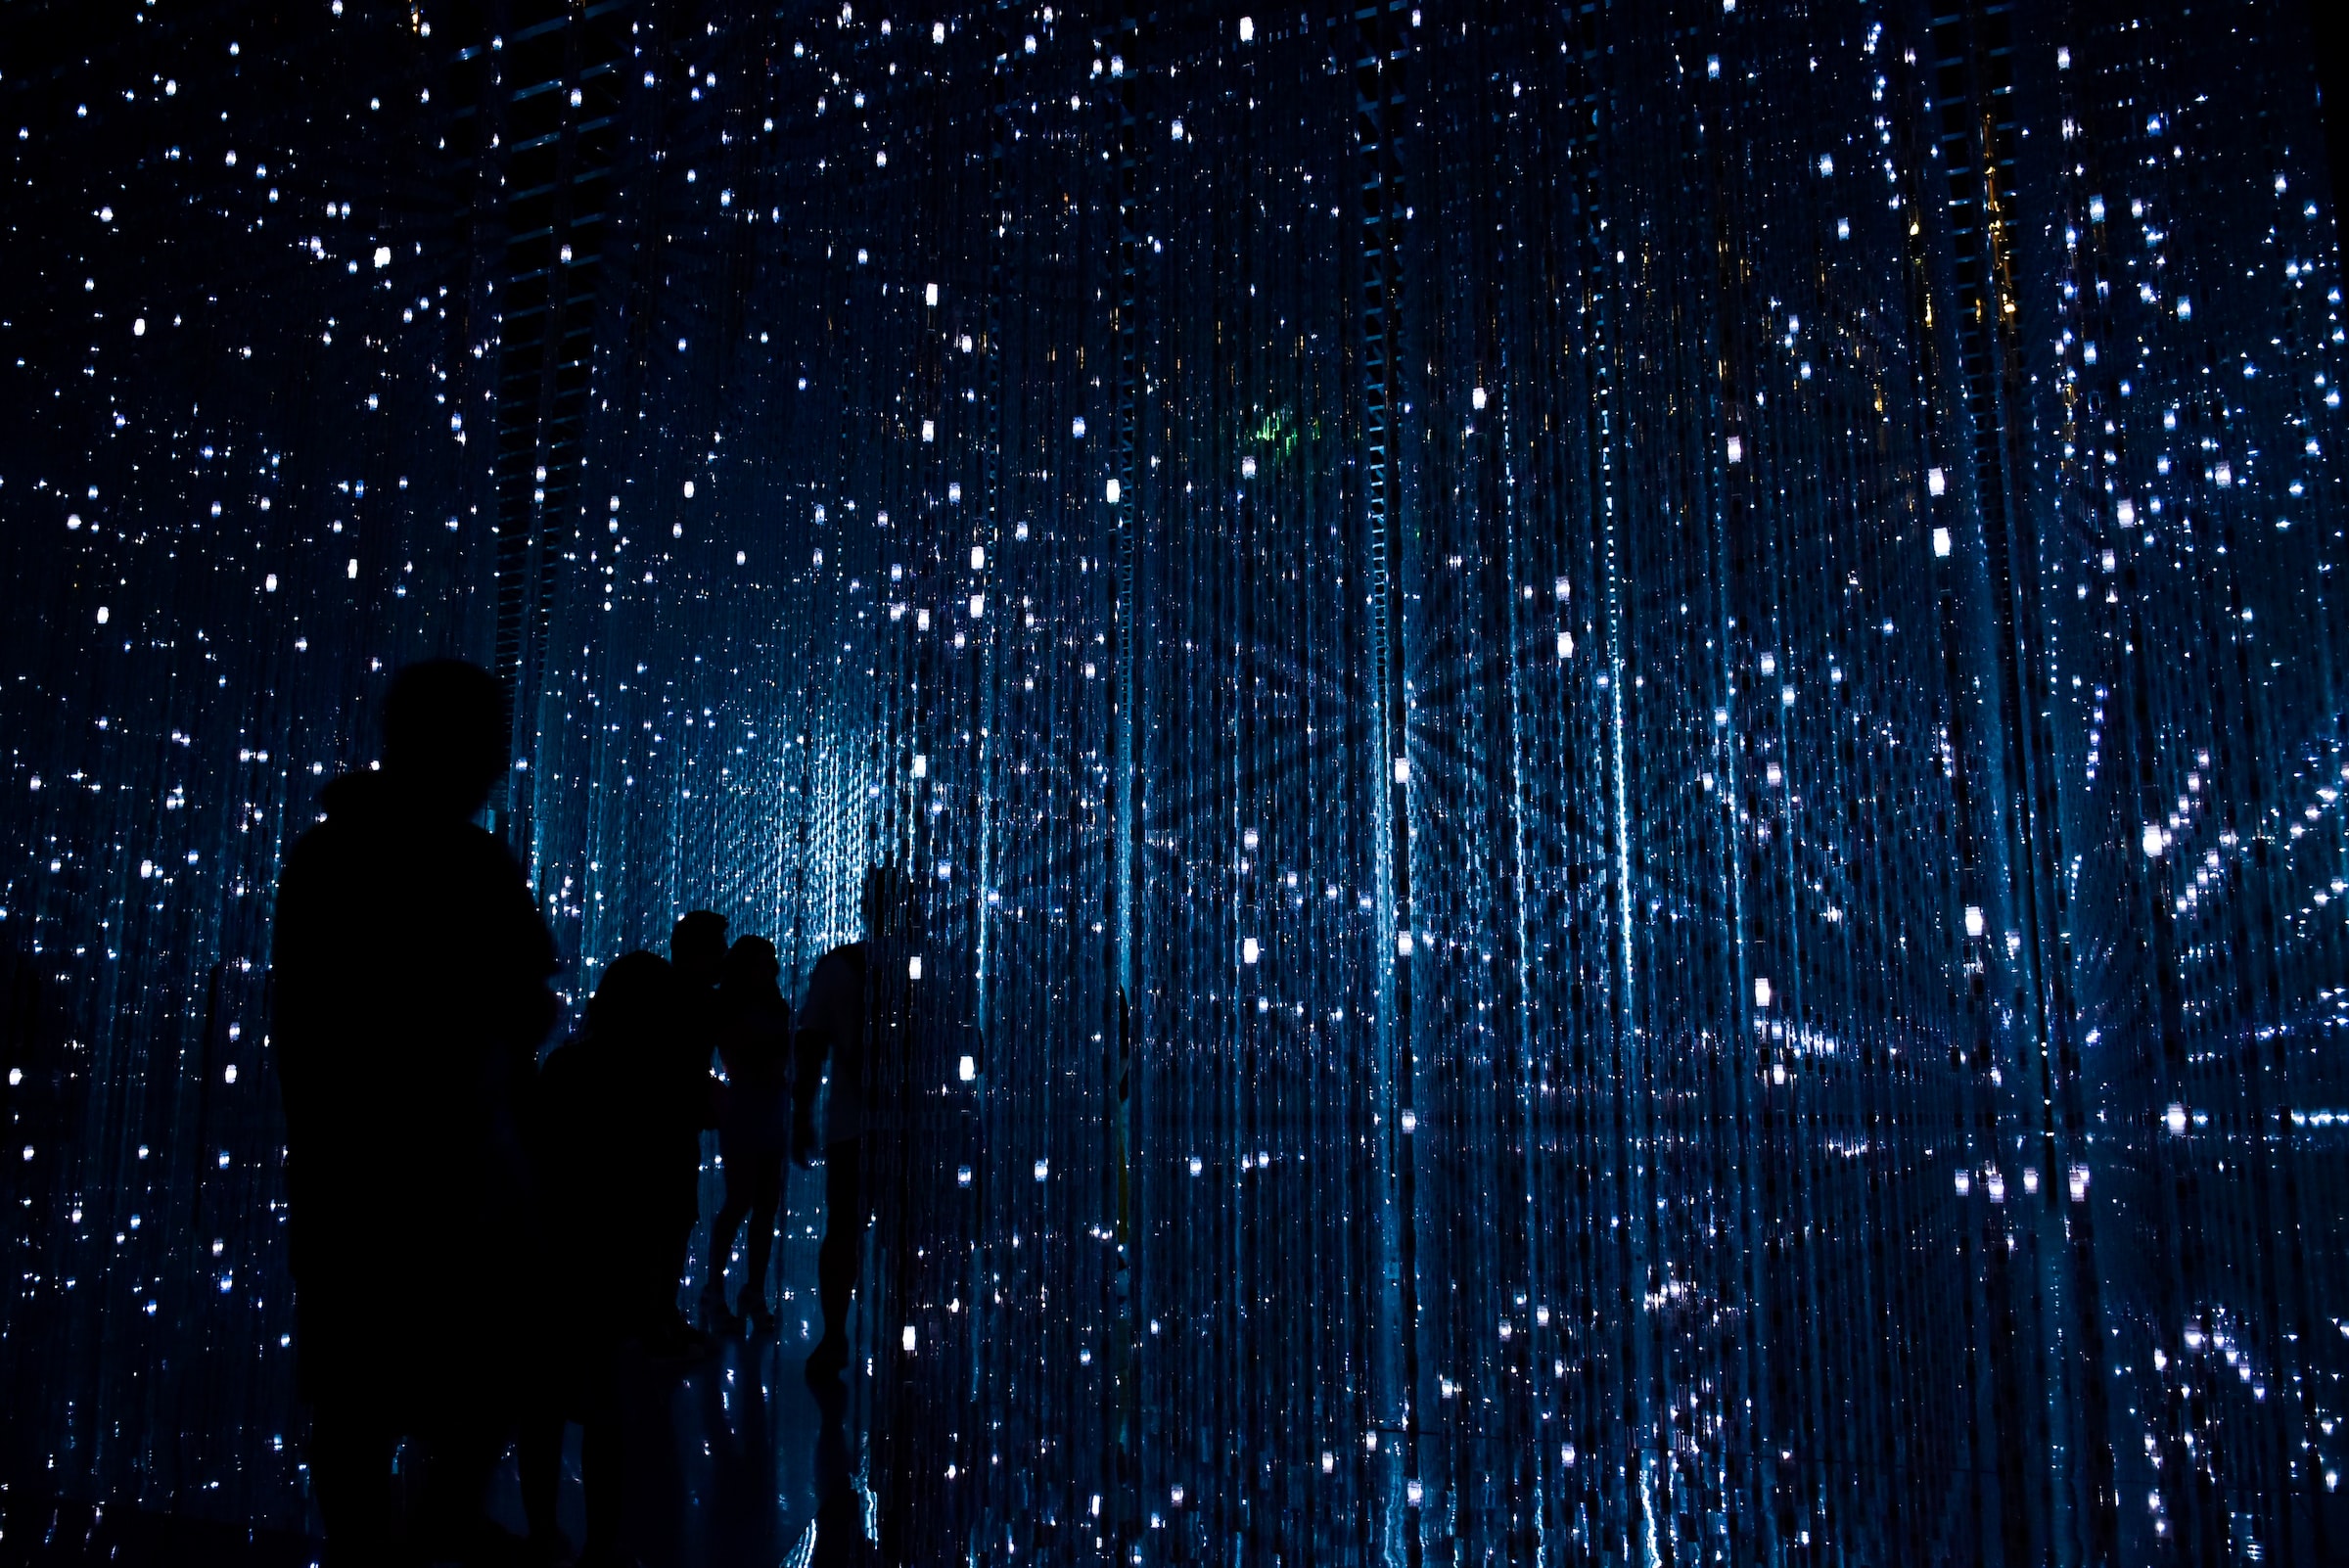 A 3-dimensional grid of lights against a blue-black background